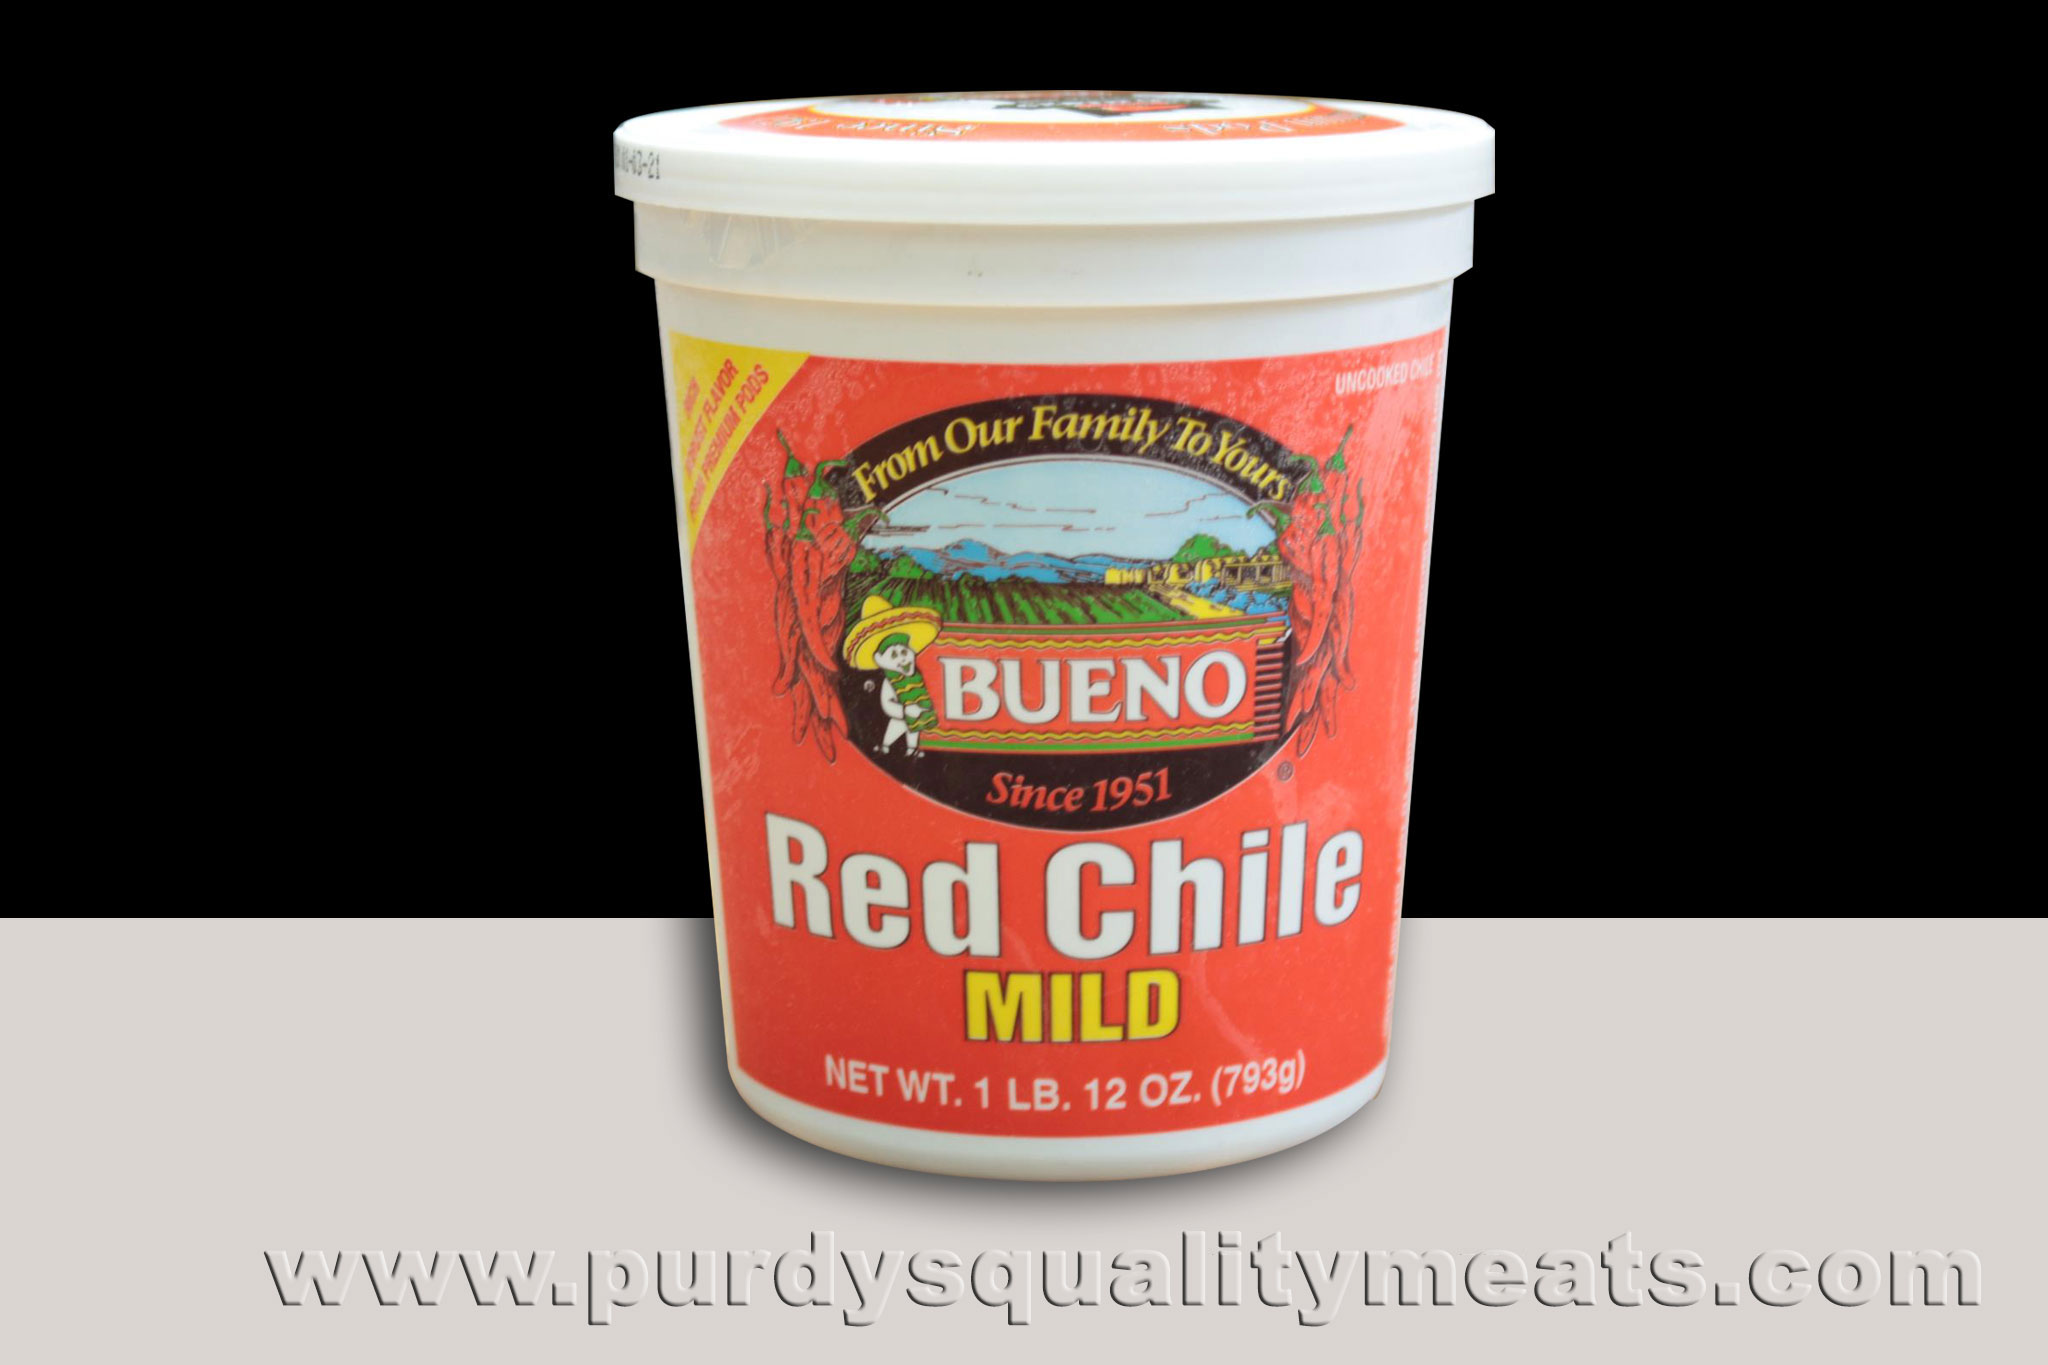 This image icon displays the Purdy's Quality Meats Red Chile image